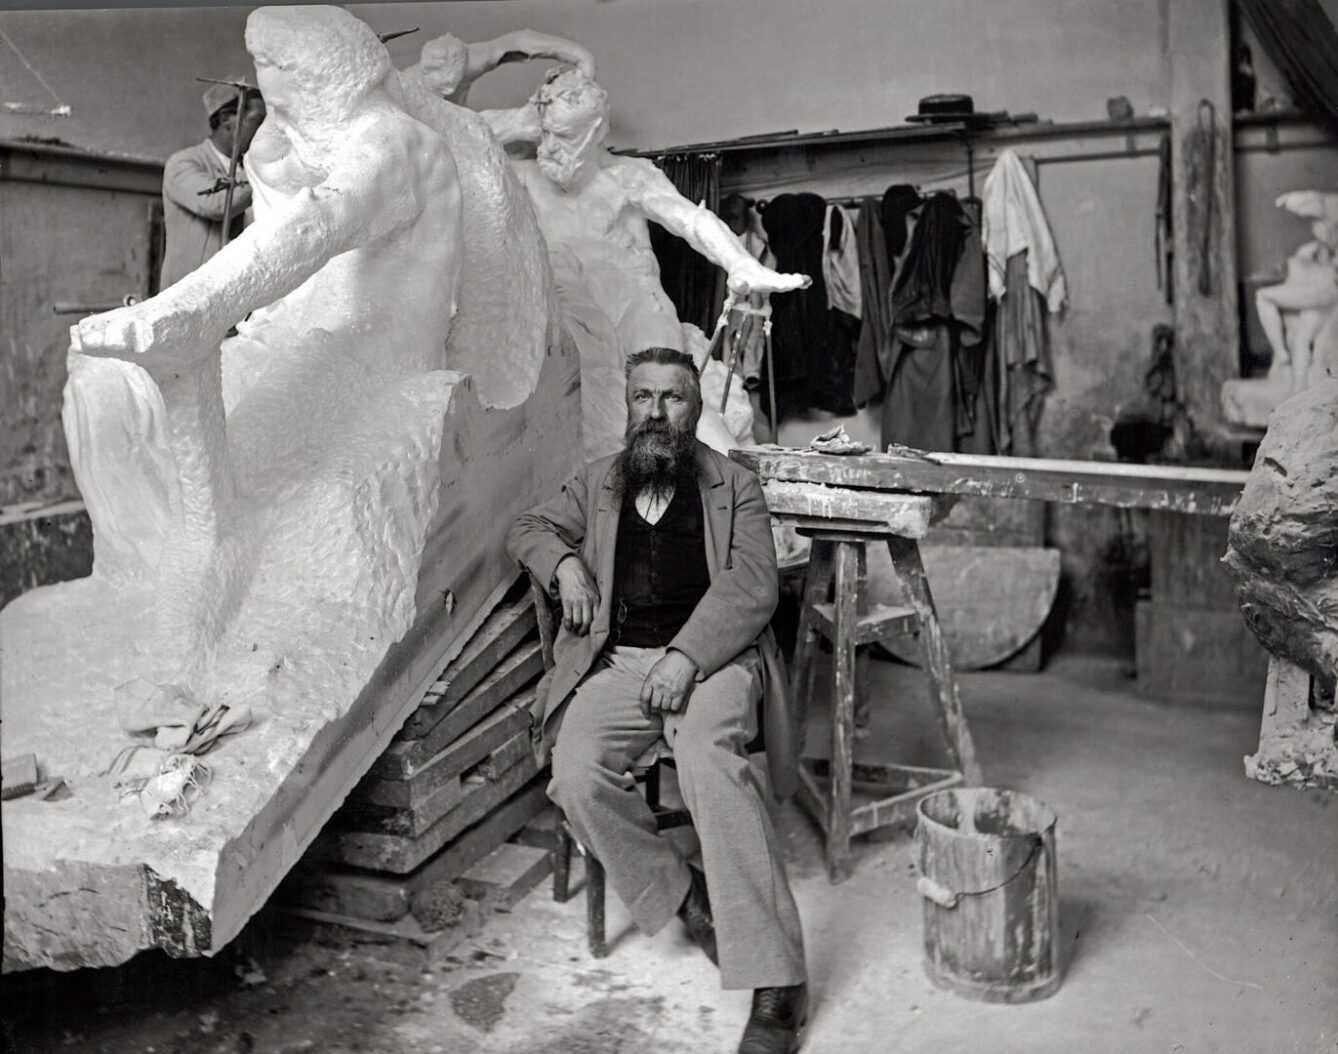 Paul Marsan Dornac, Rodin seated in his studio in front of the Monument to Victor Hugo, 1898. Bridgeman Images